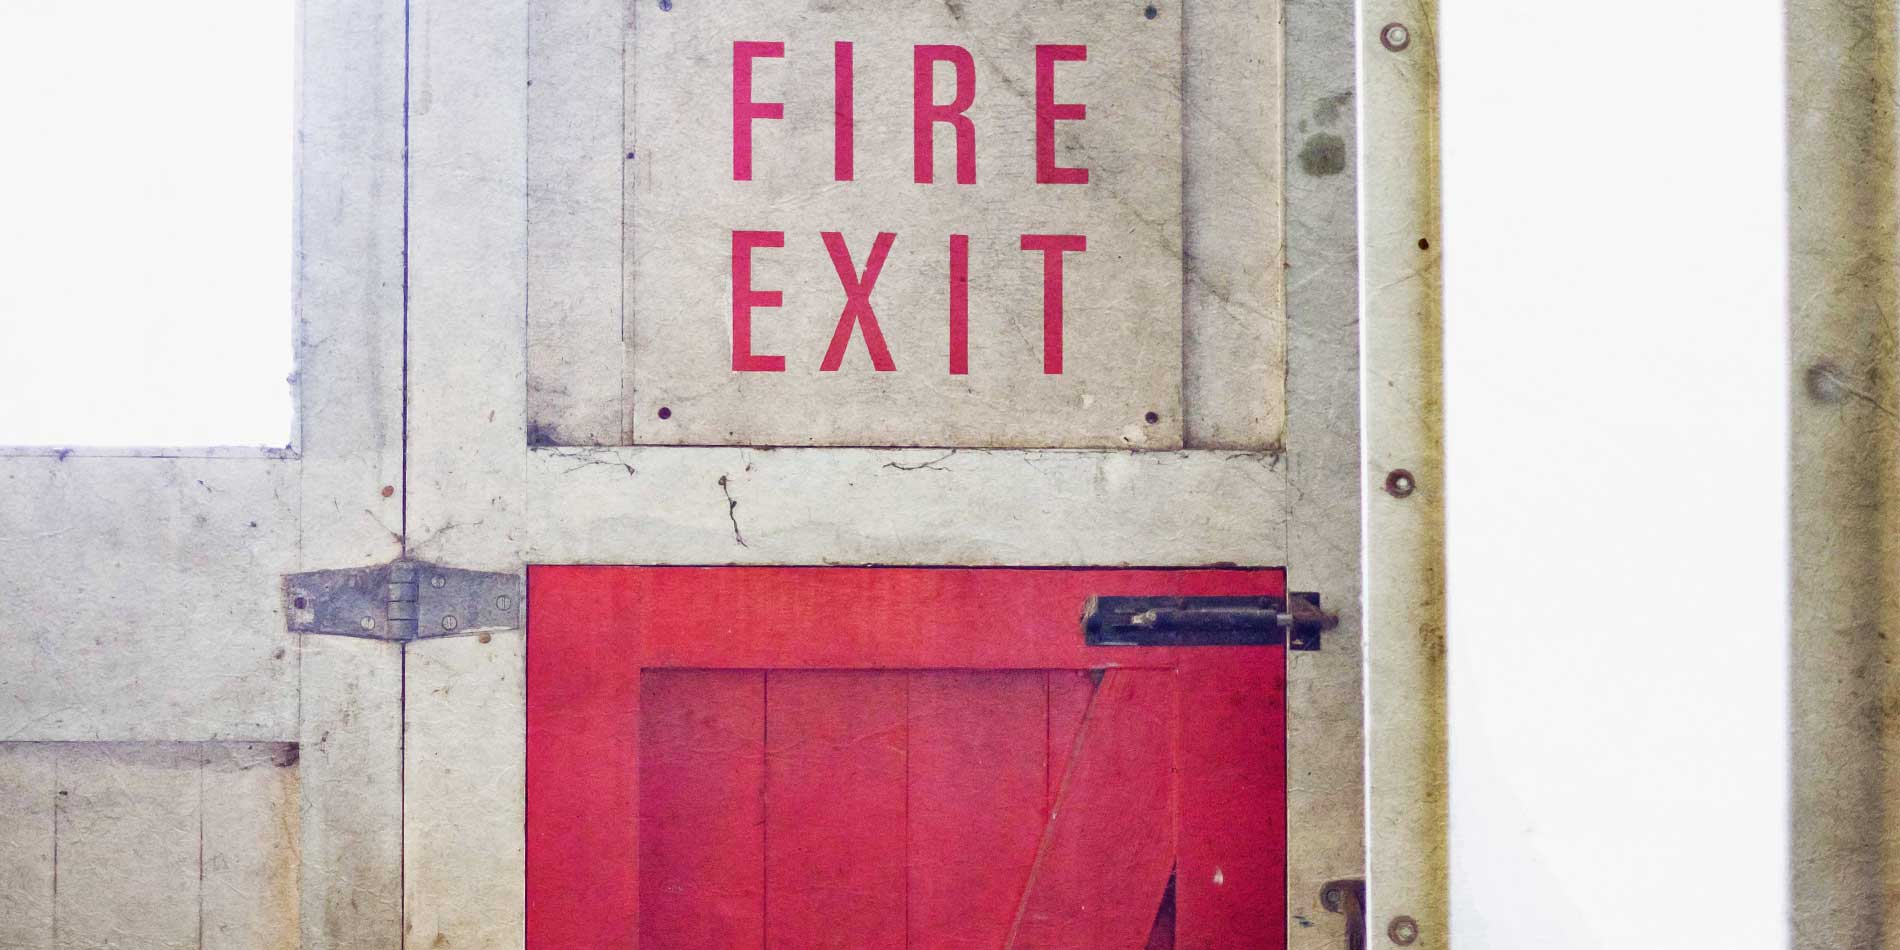 Creative image of old fire exit doors